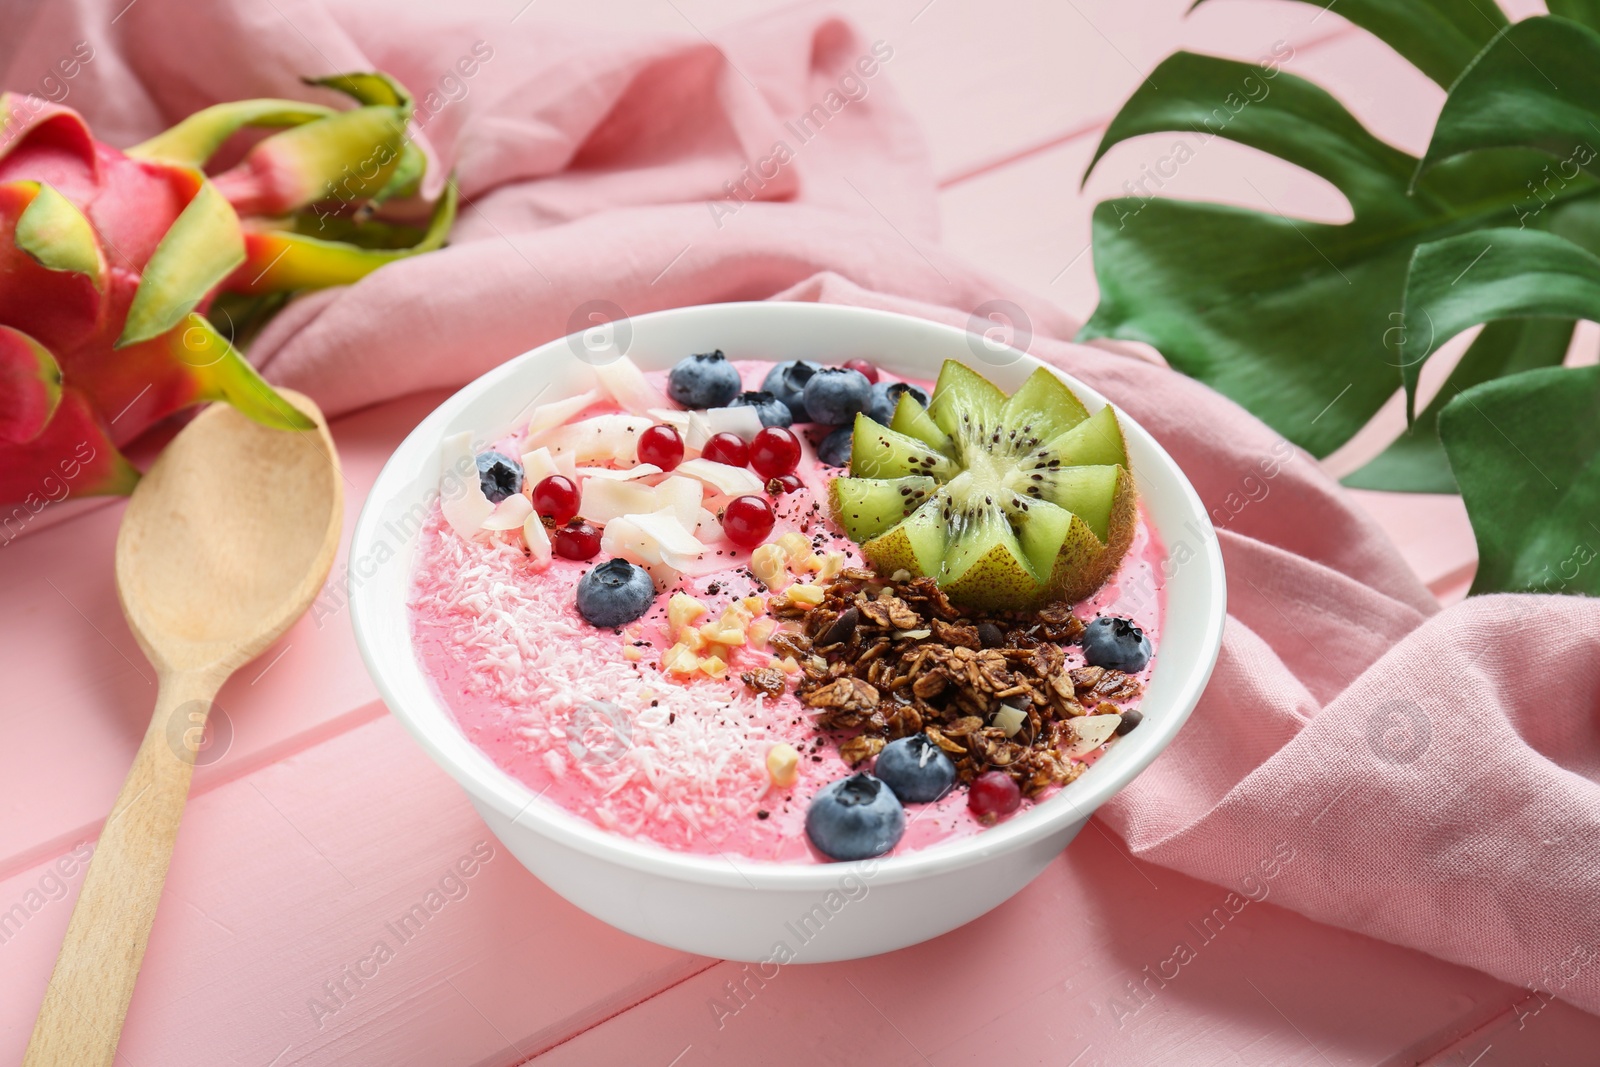 Photo of Tasty smoothie bowl with fresh kiwi fruit, berries and granola on pink wooden table